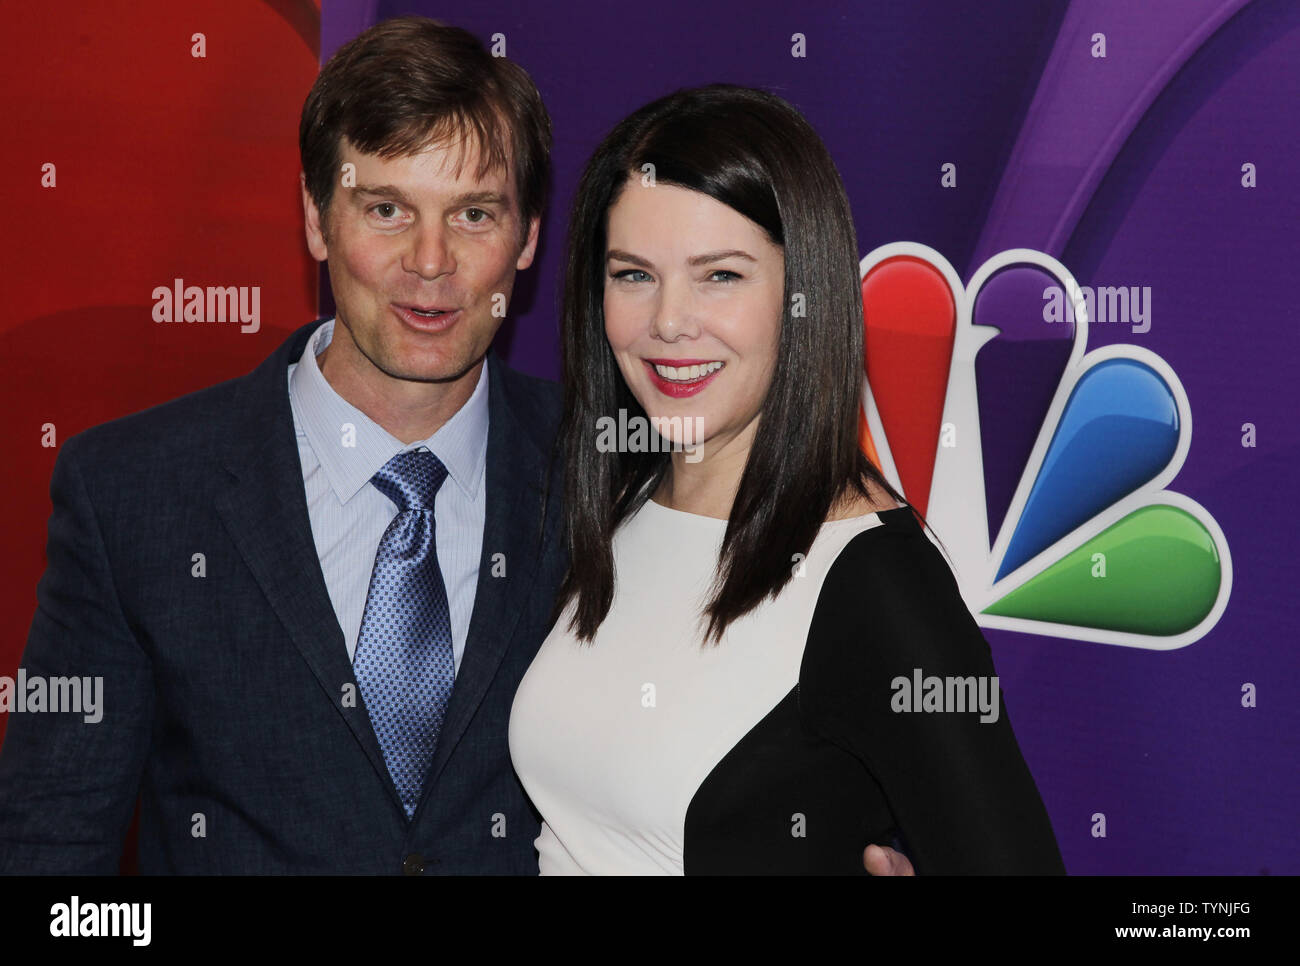 Lauren Graham and Peter Krause arrive on the red carpet at the 2013 NBC Upfront Presentation at Radio City Music Hall in New York City on May 13, 2013.    UPI/John Angelillo Stock Photo